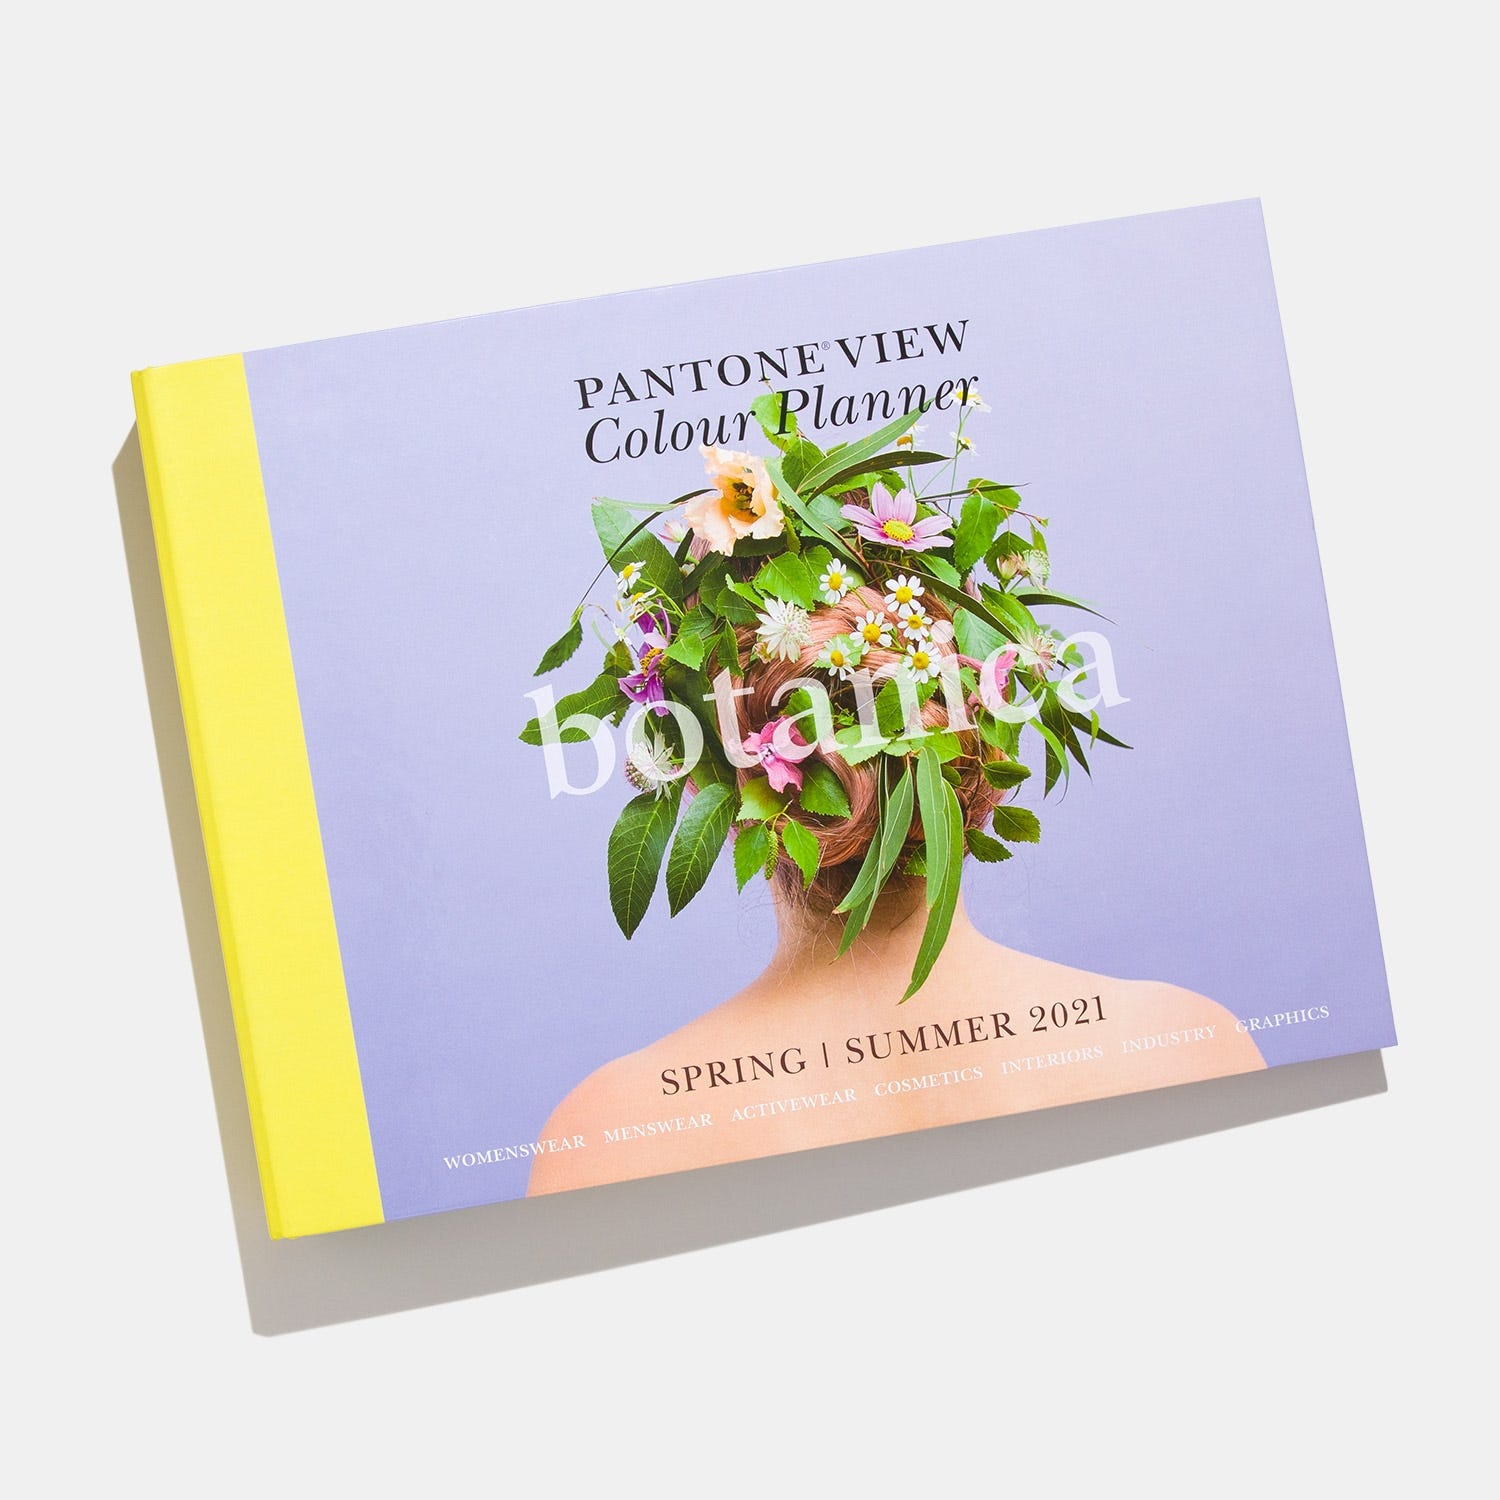 PANTONEVIEW Colour Planner Spring/Summer 2021